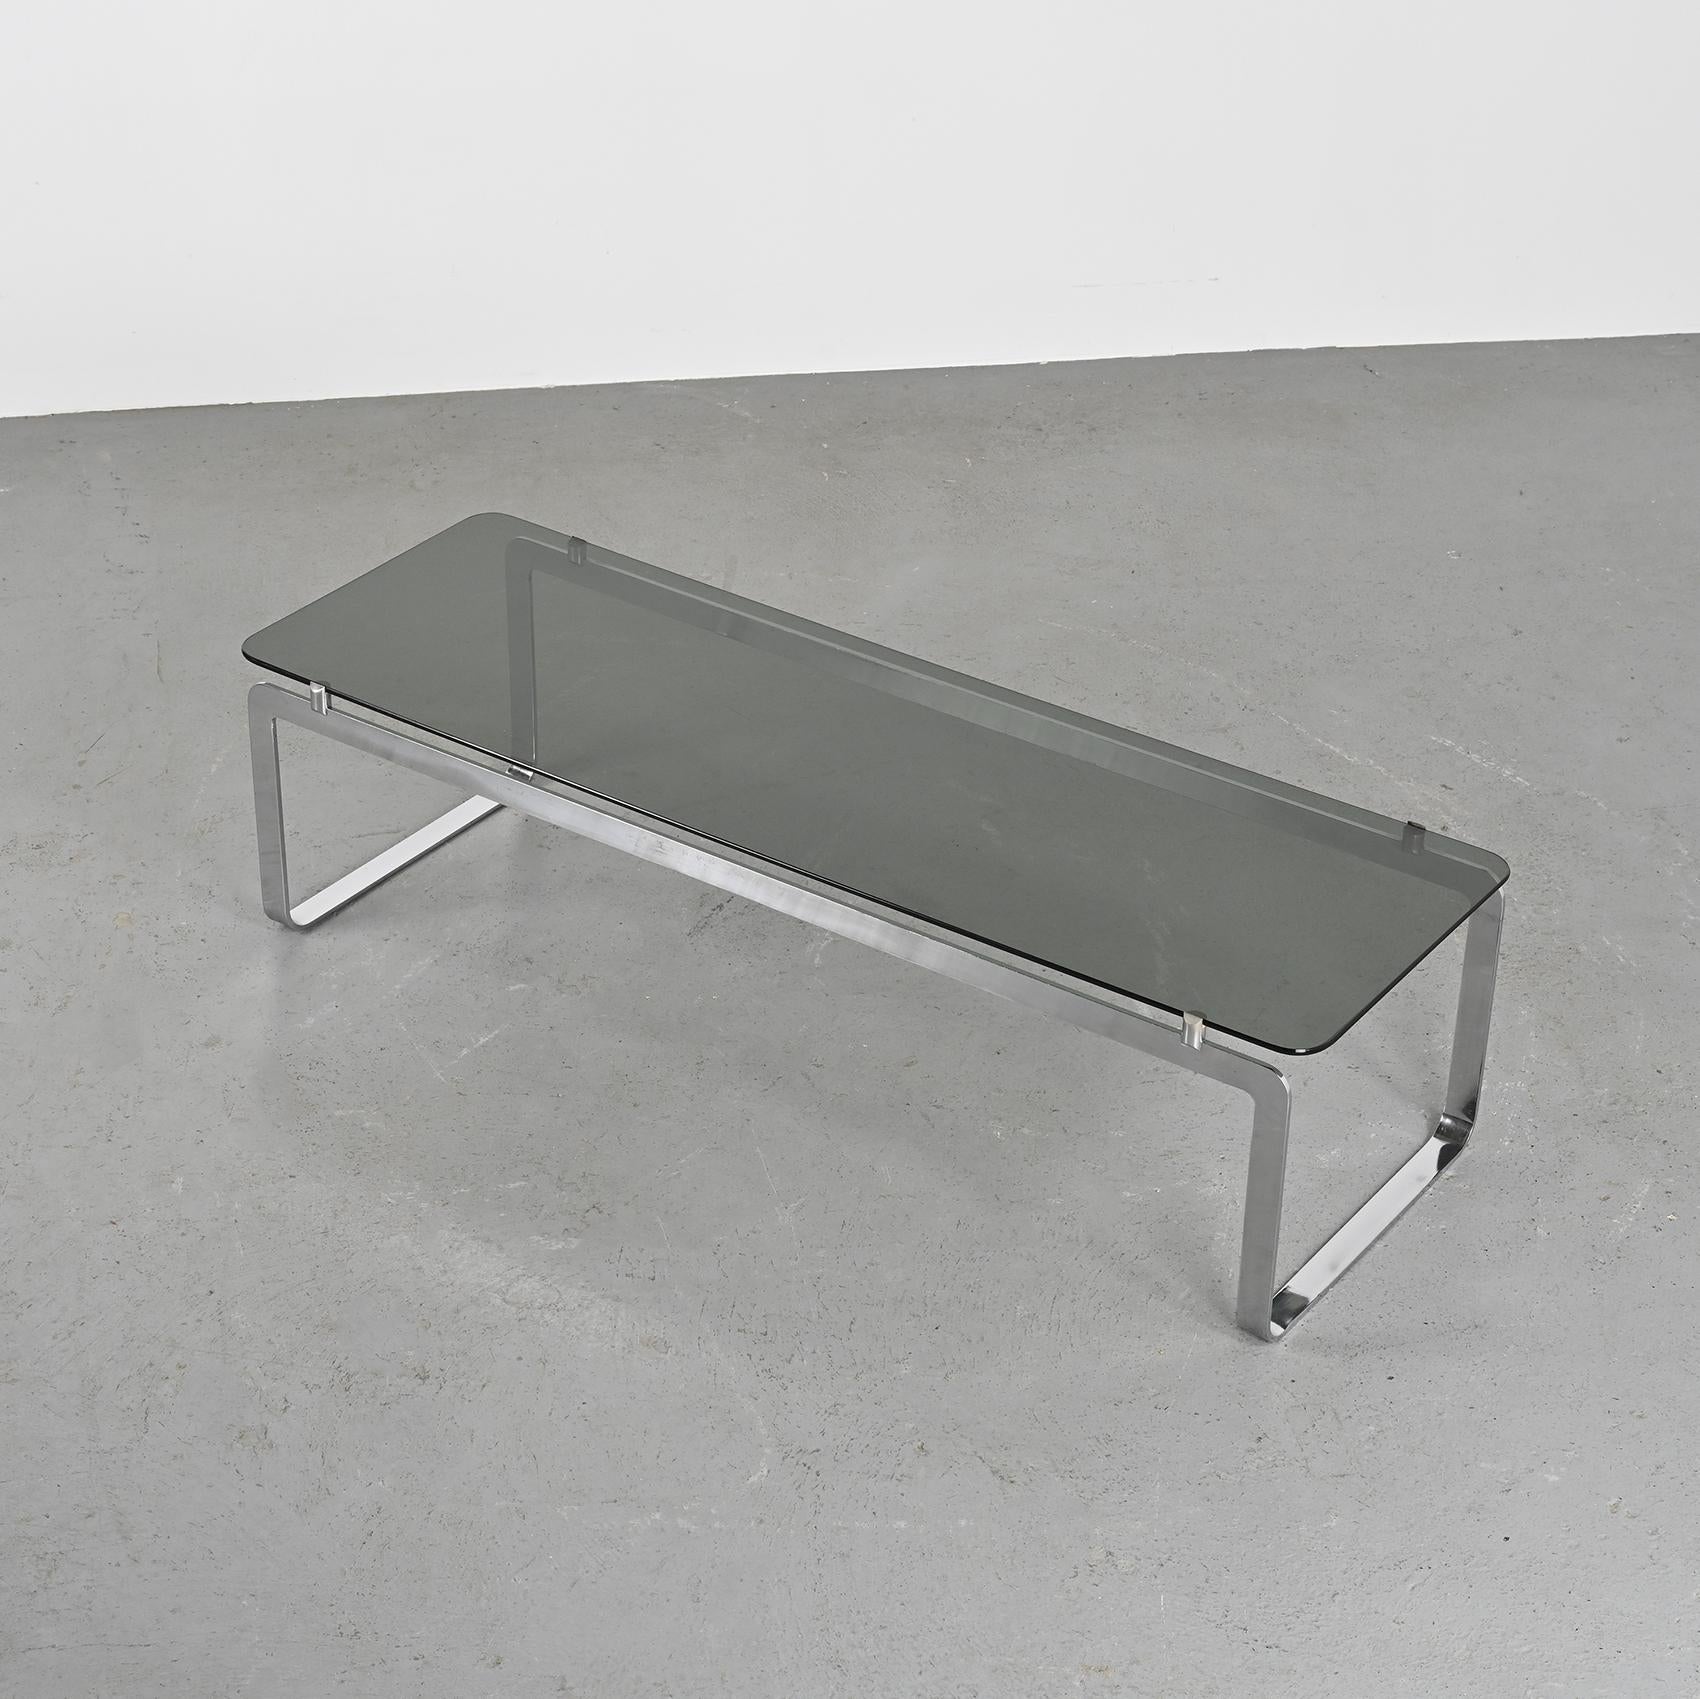 Elegant rectangular coffee table, P42 Model, envisioned by French designer Bernard Govin and crafted by Saporiti in the 1960s.

The sled-style base, constructed from chromed steel, gracefully encases a substantial smoked glass